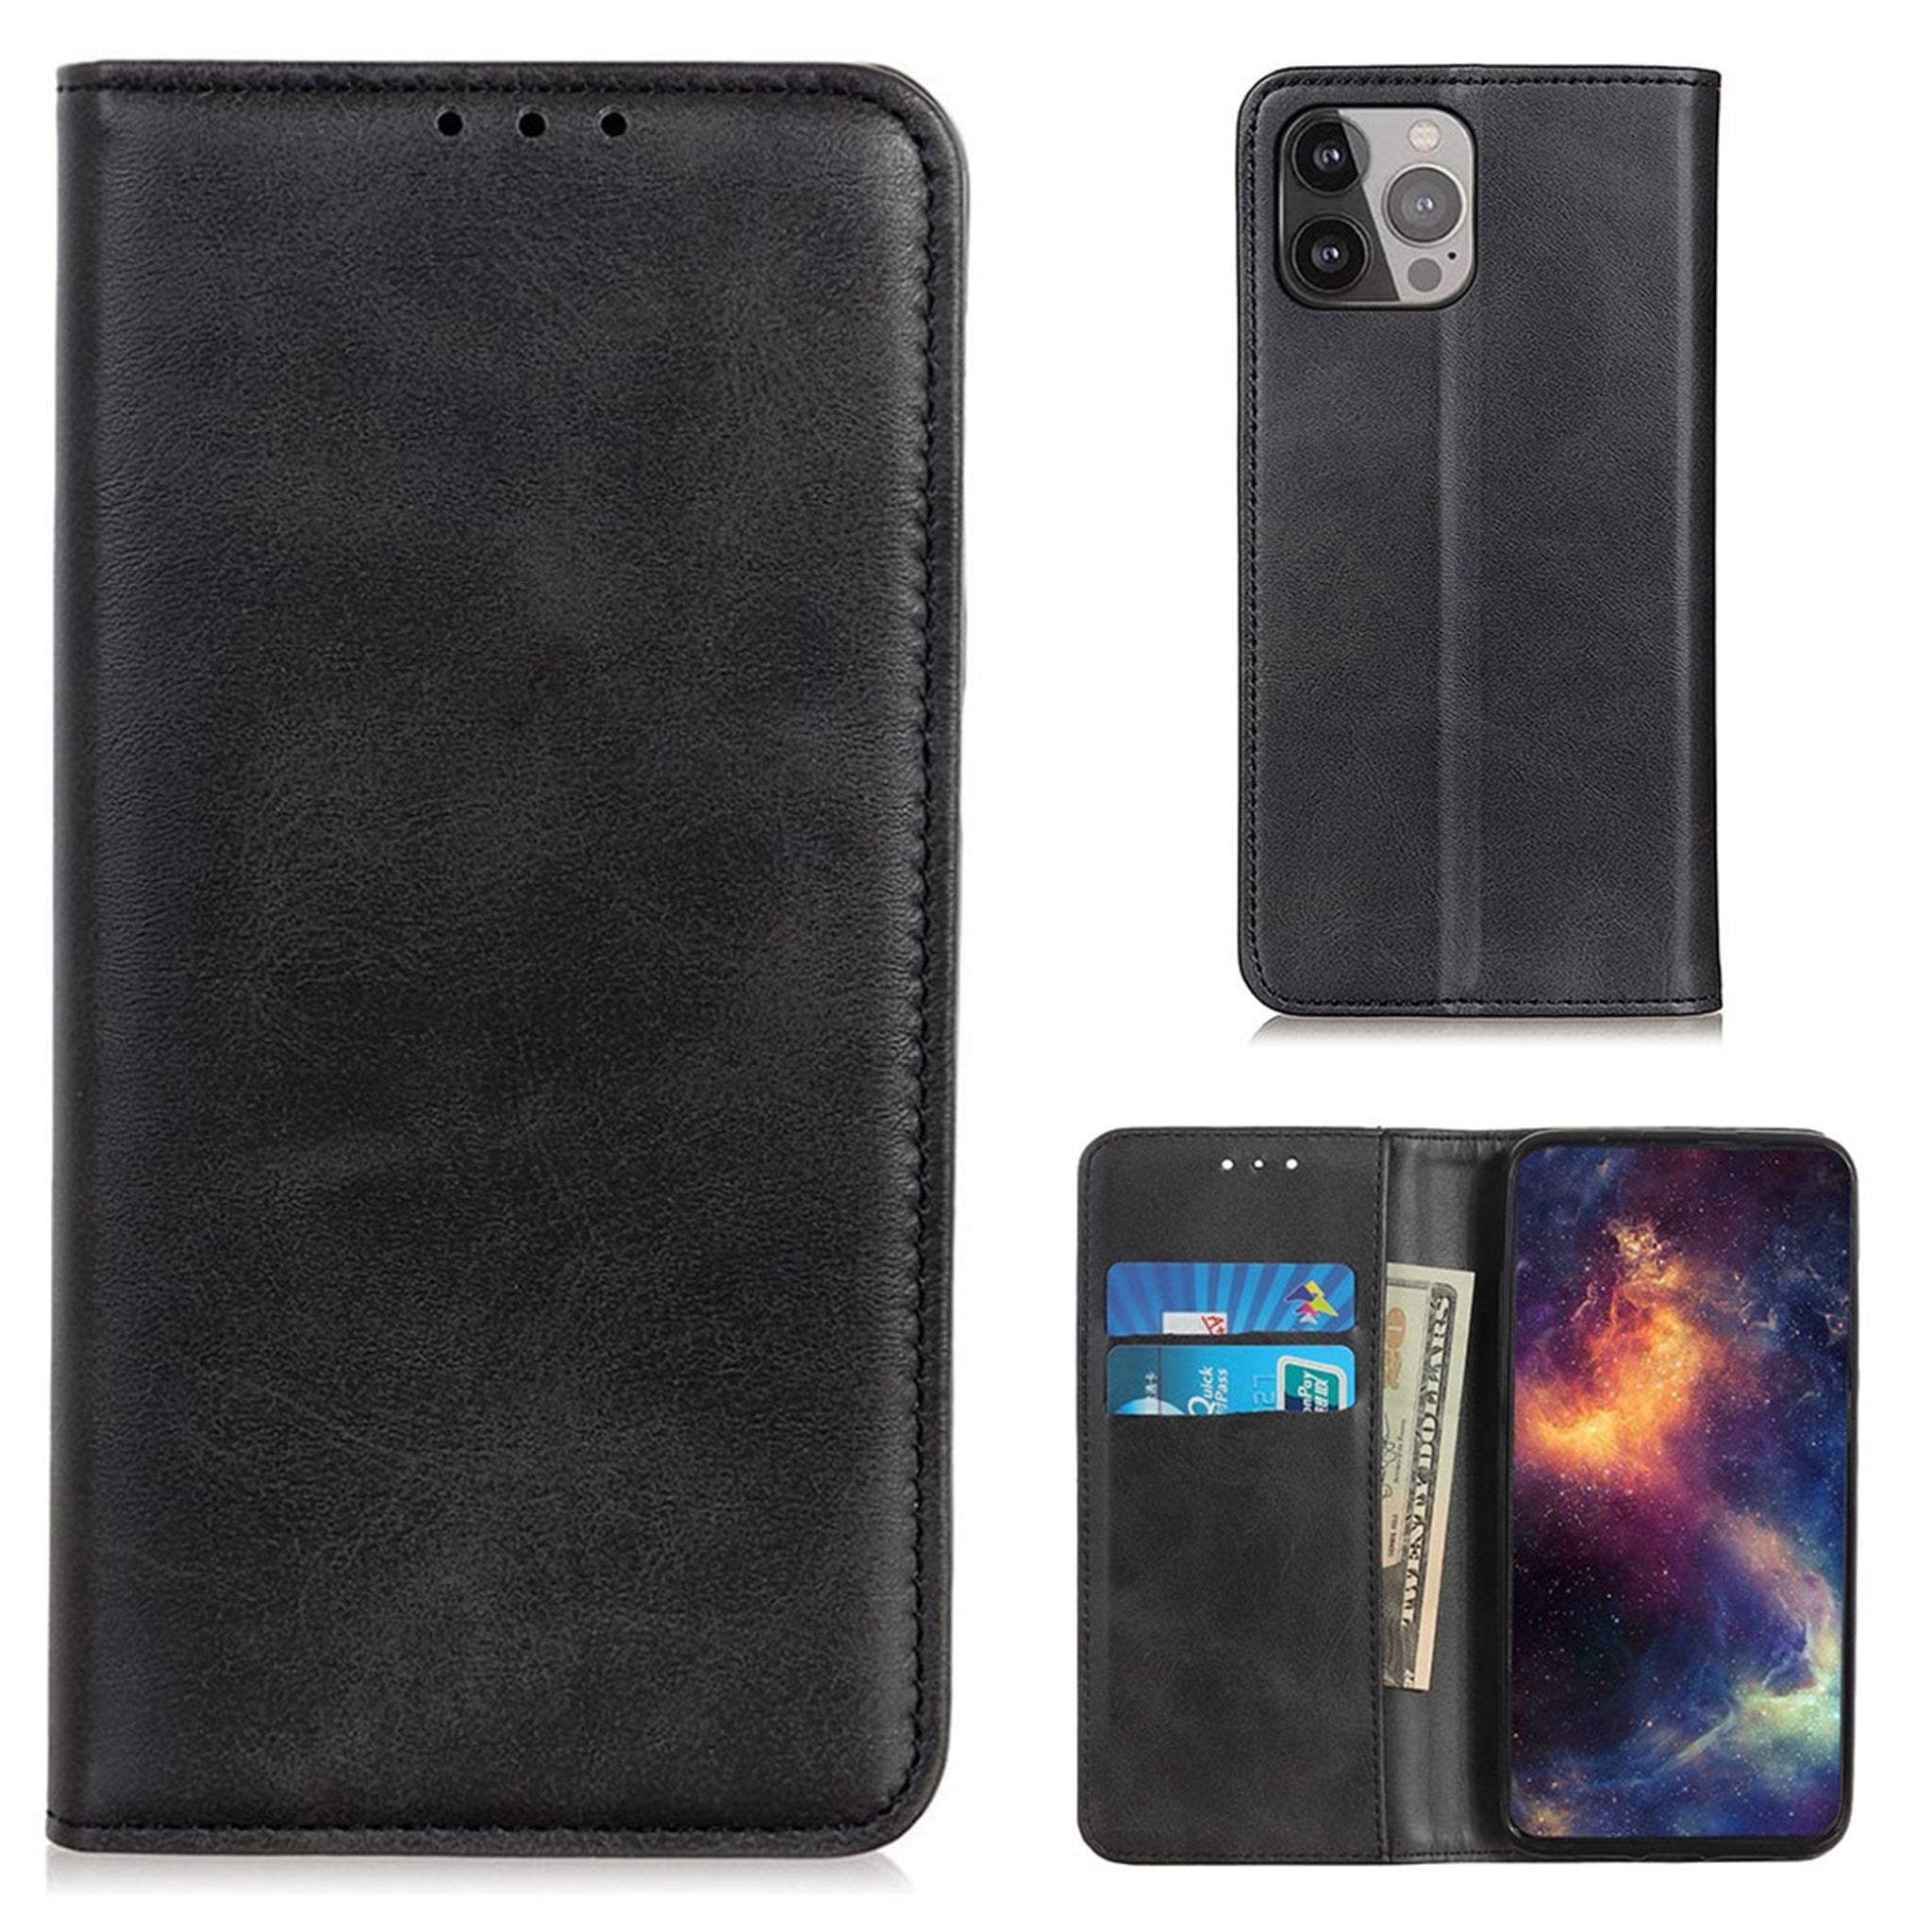 Wallet-style genuine leather flipcase for iPhone 13 Pro Max - Black